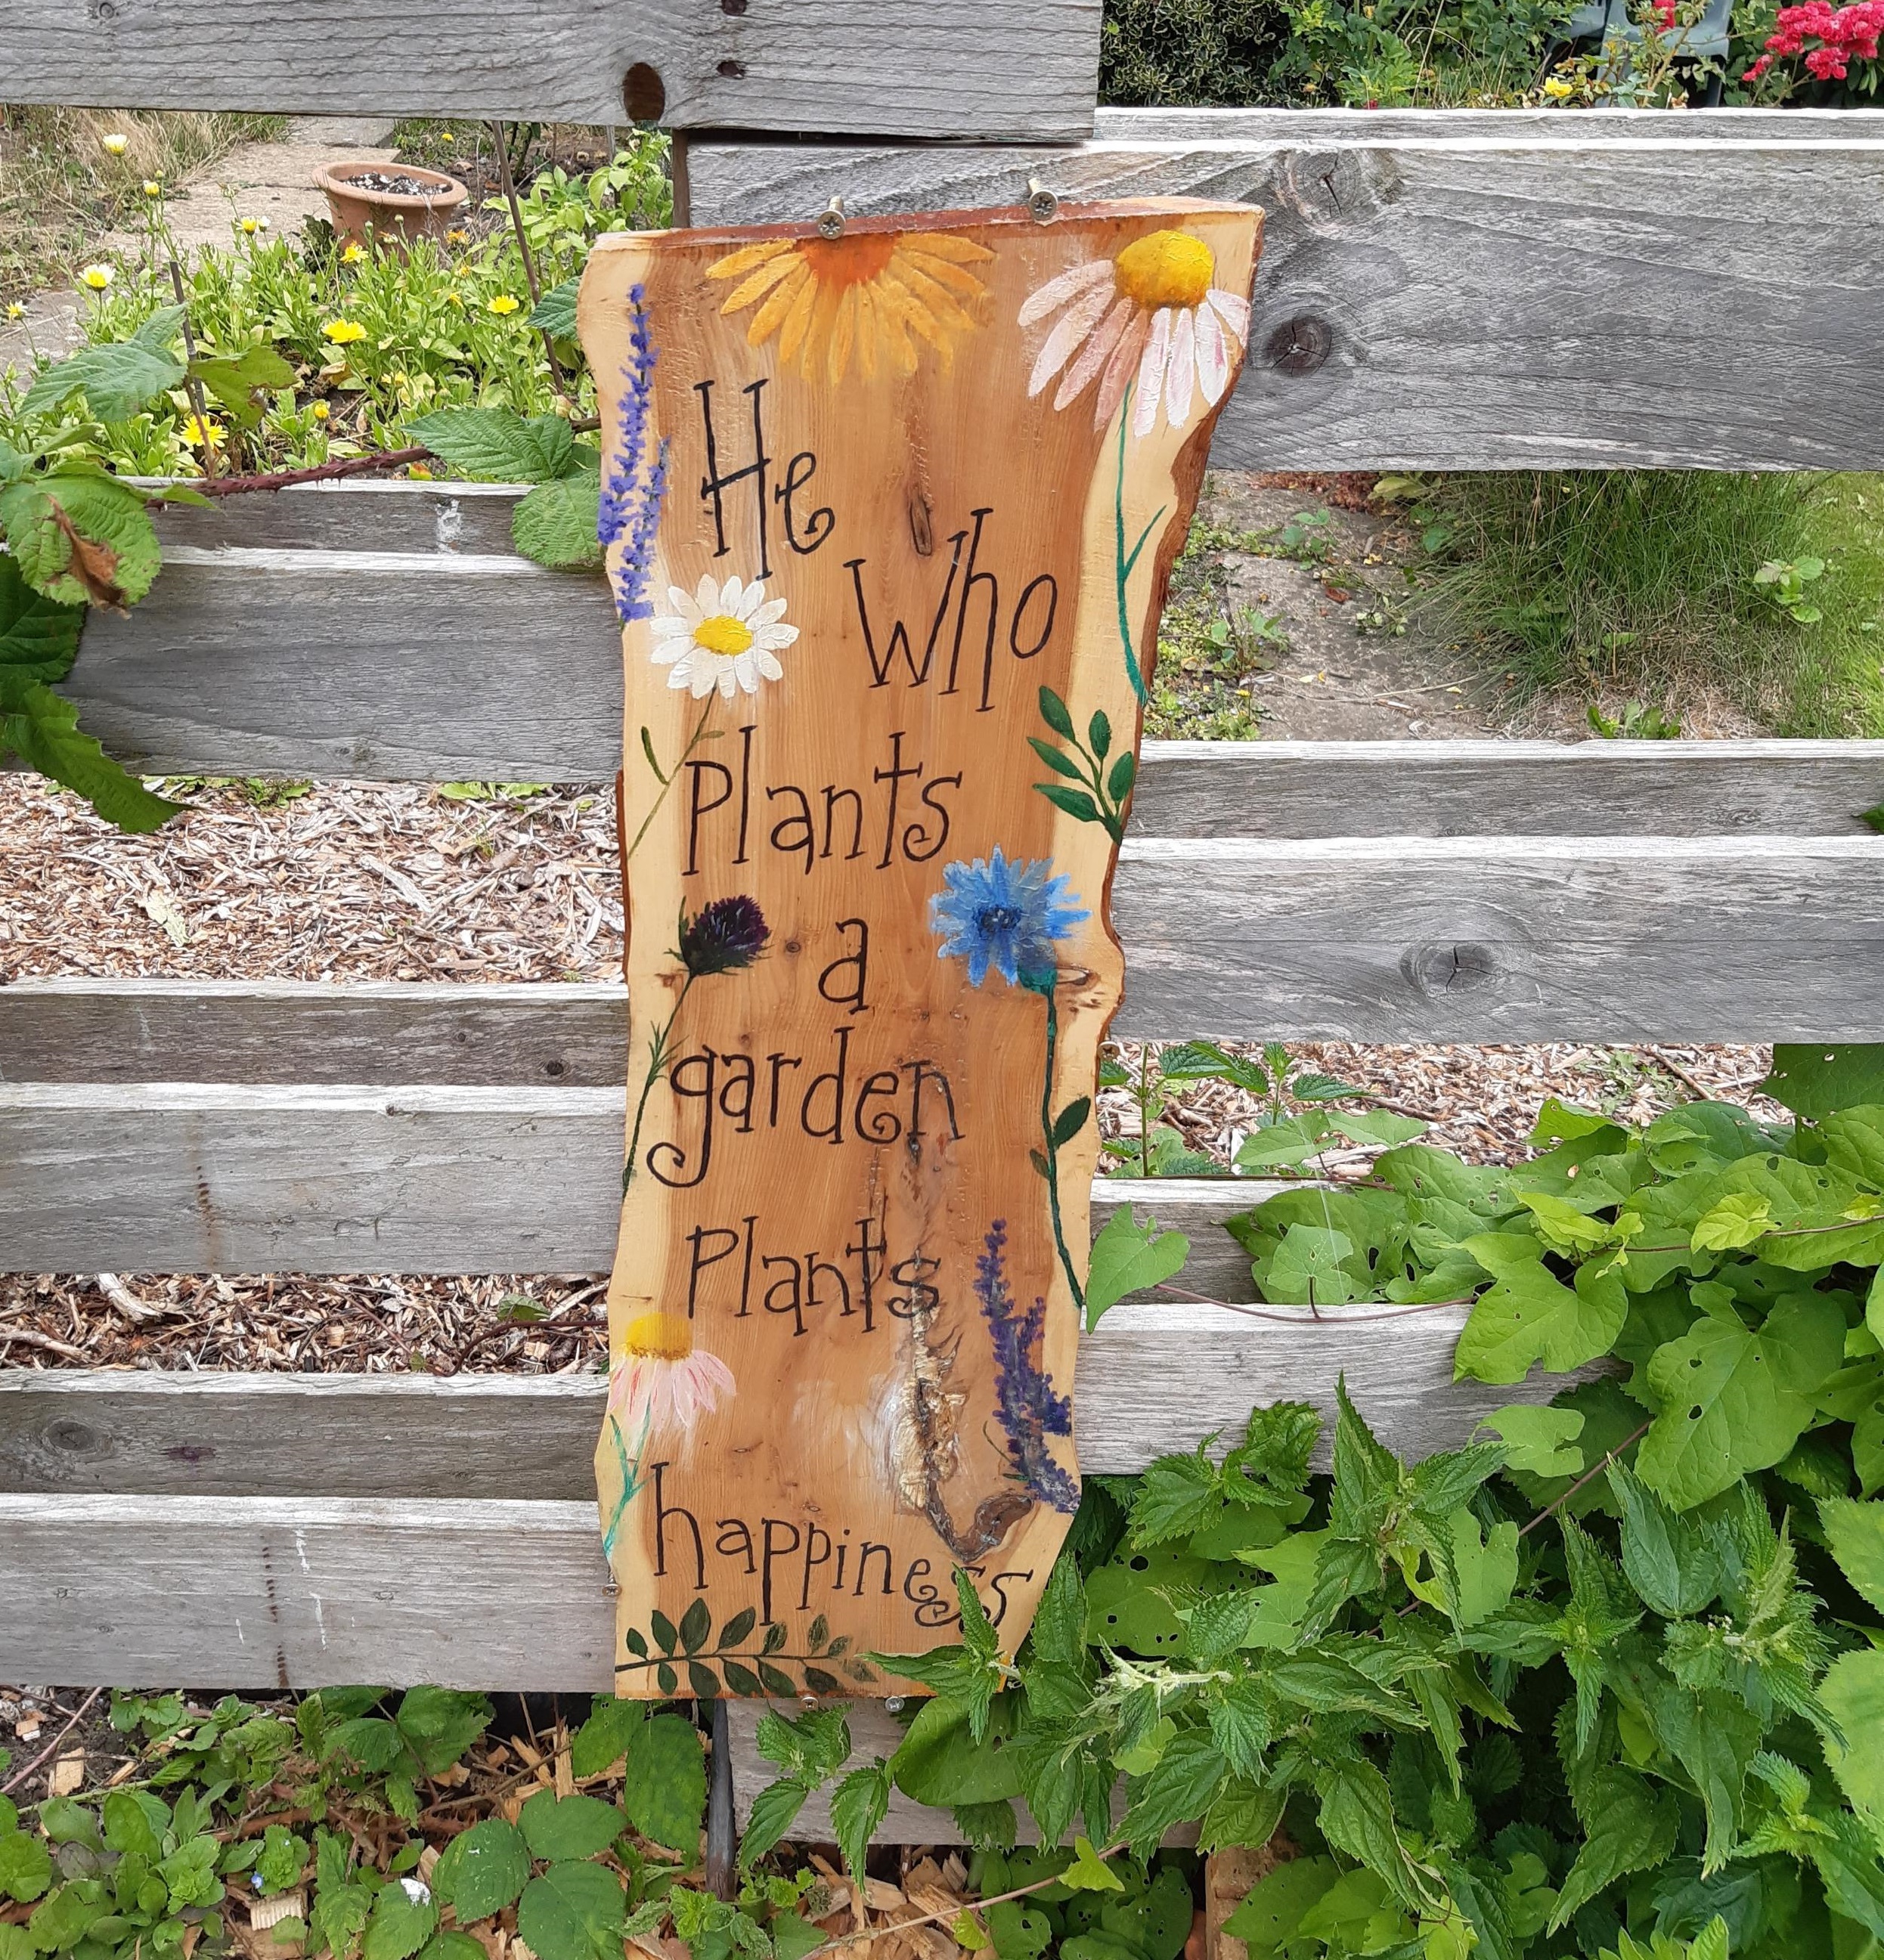 Sign on a fence reading "He who plants a garden plants happiness"